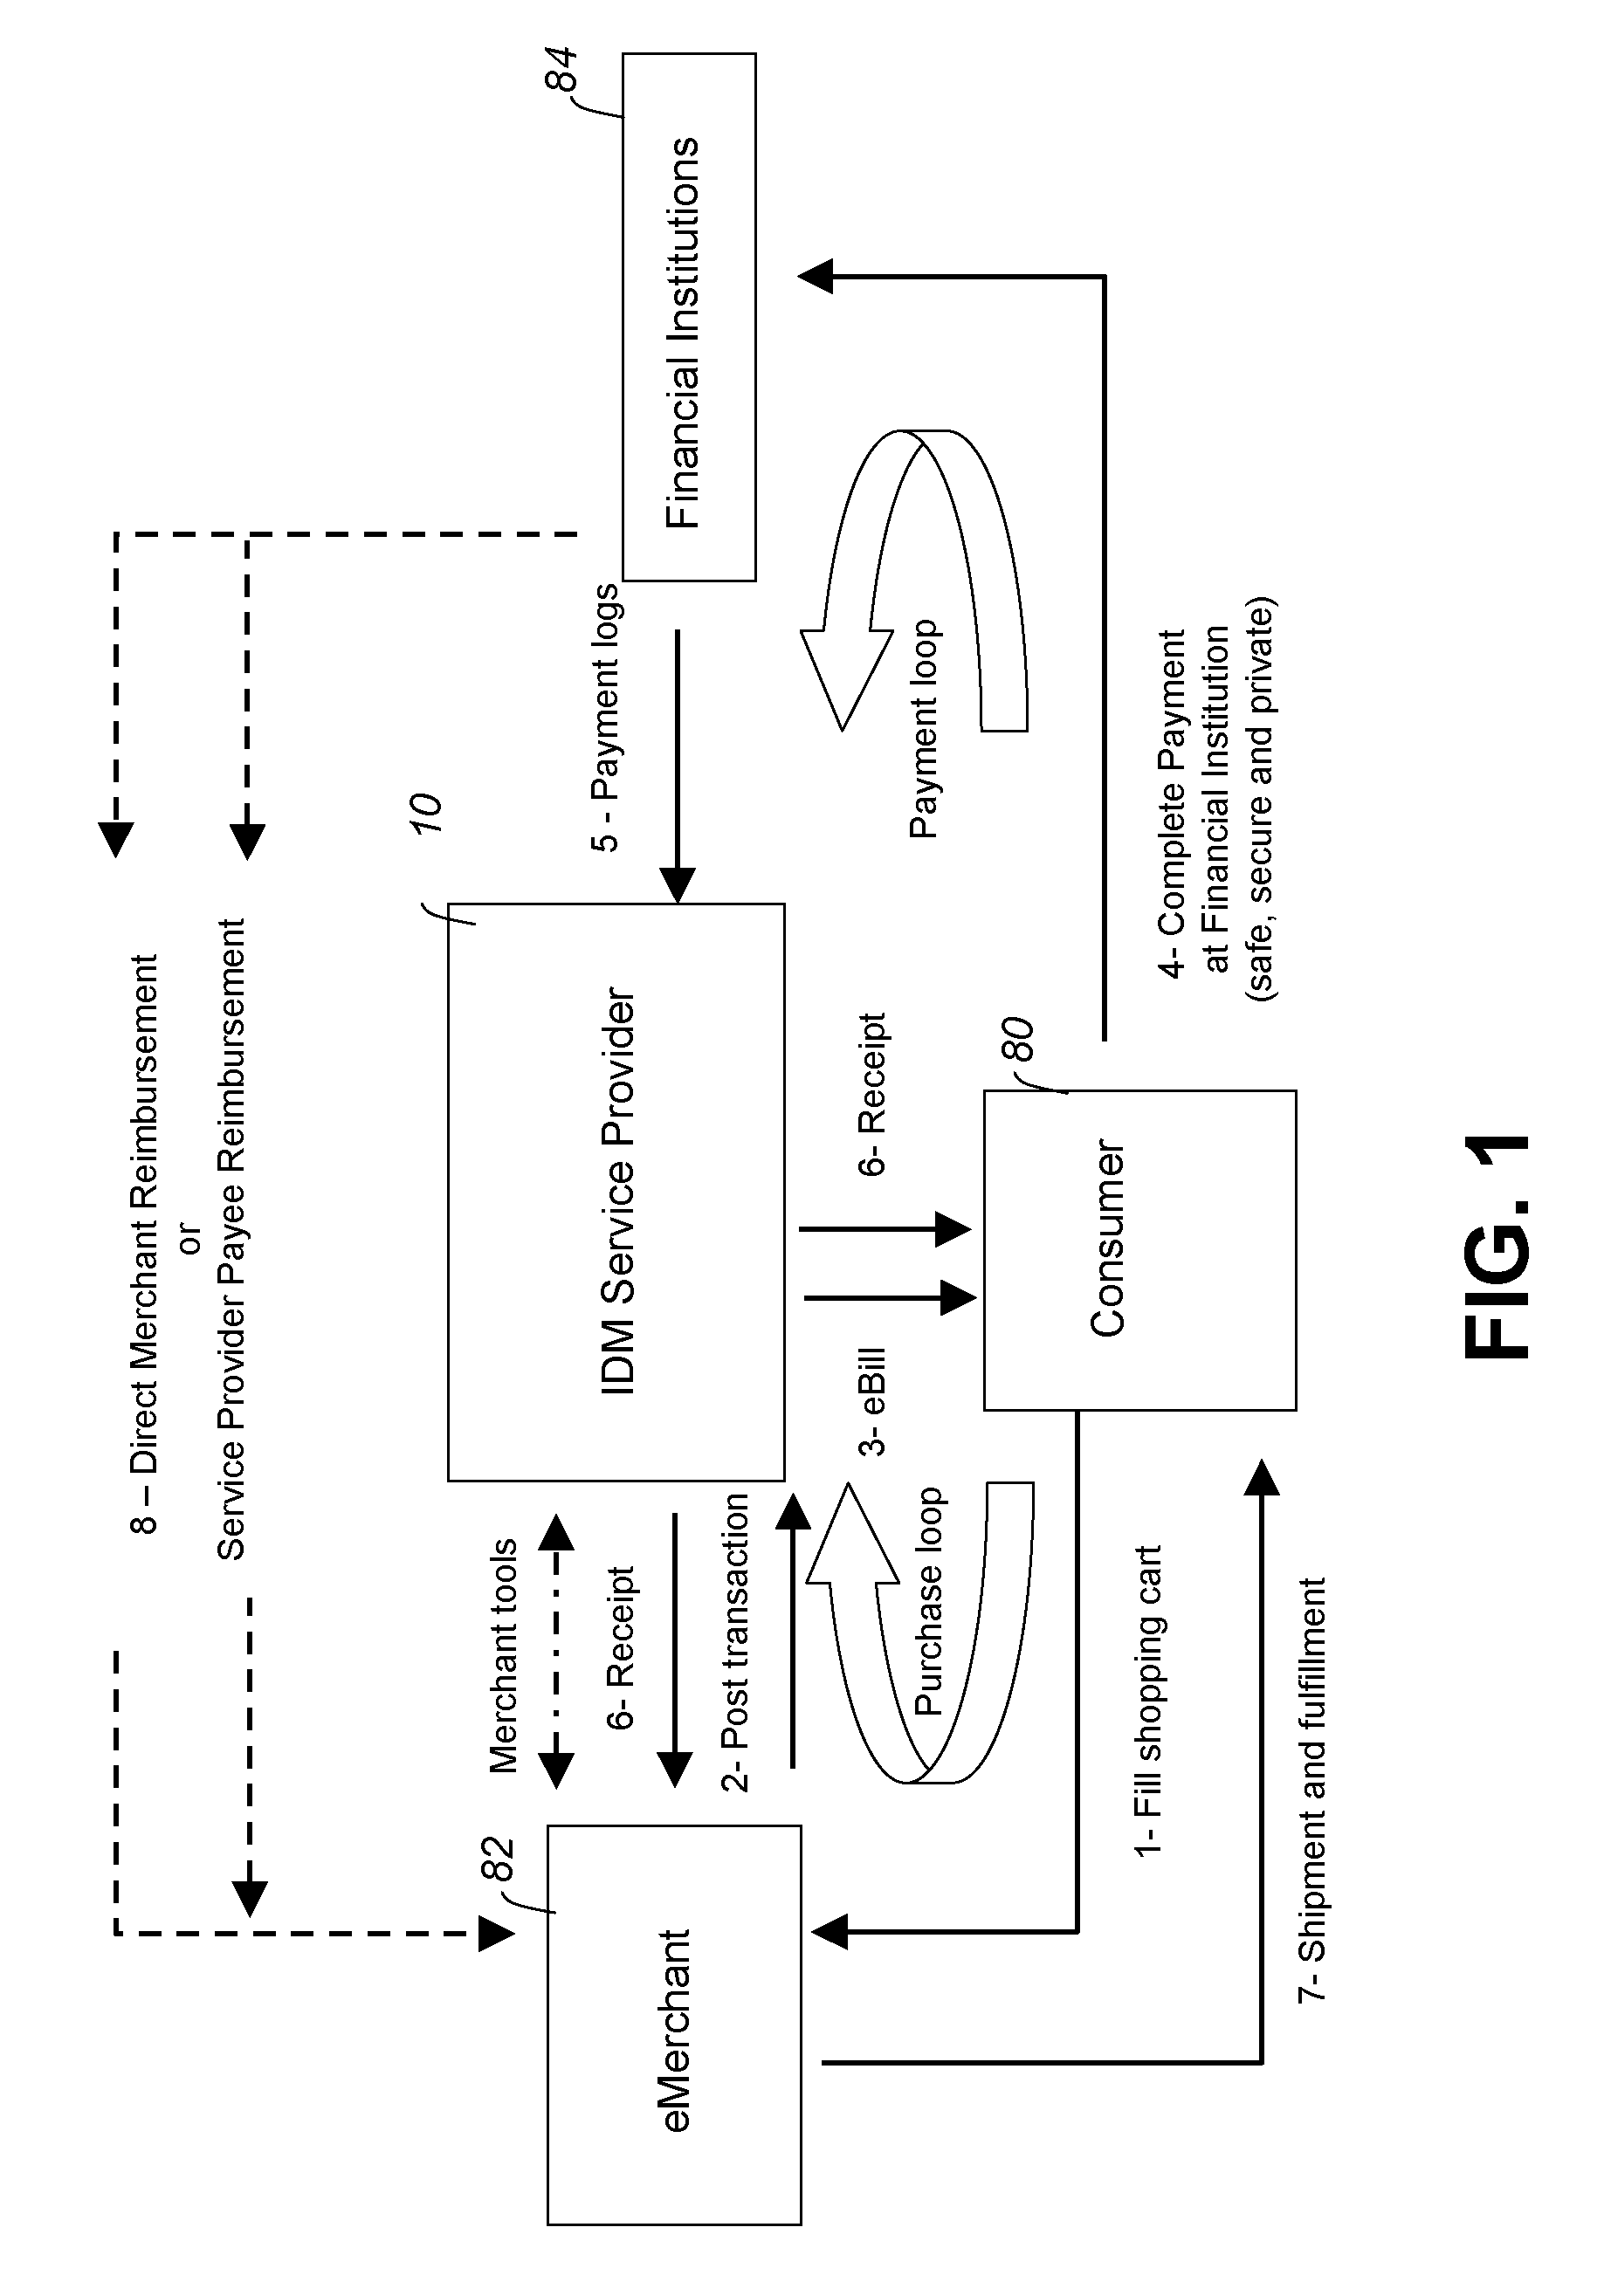 Internet payment system and method